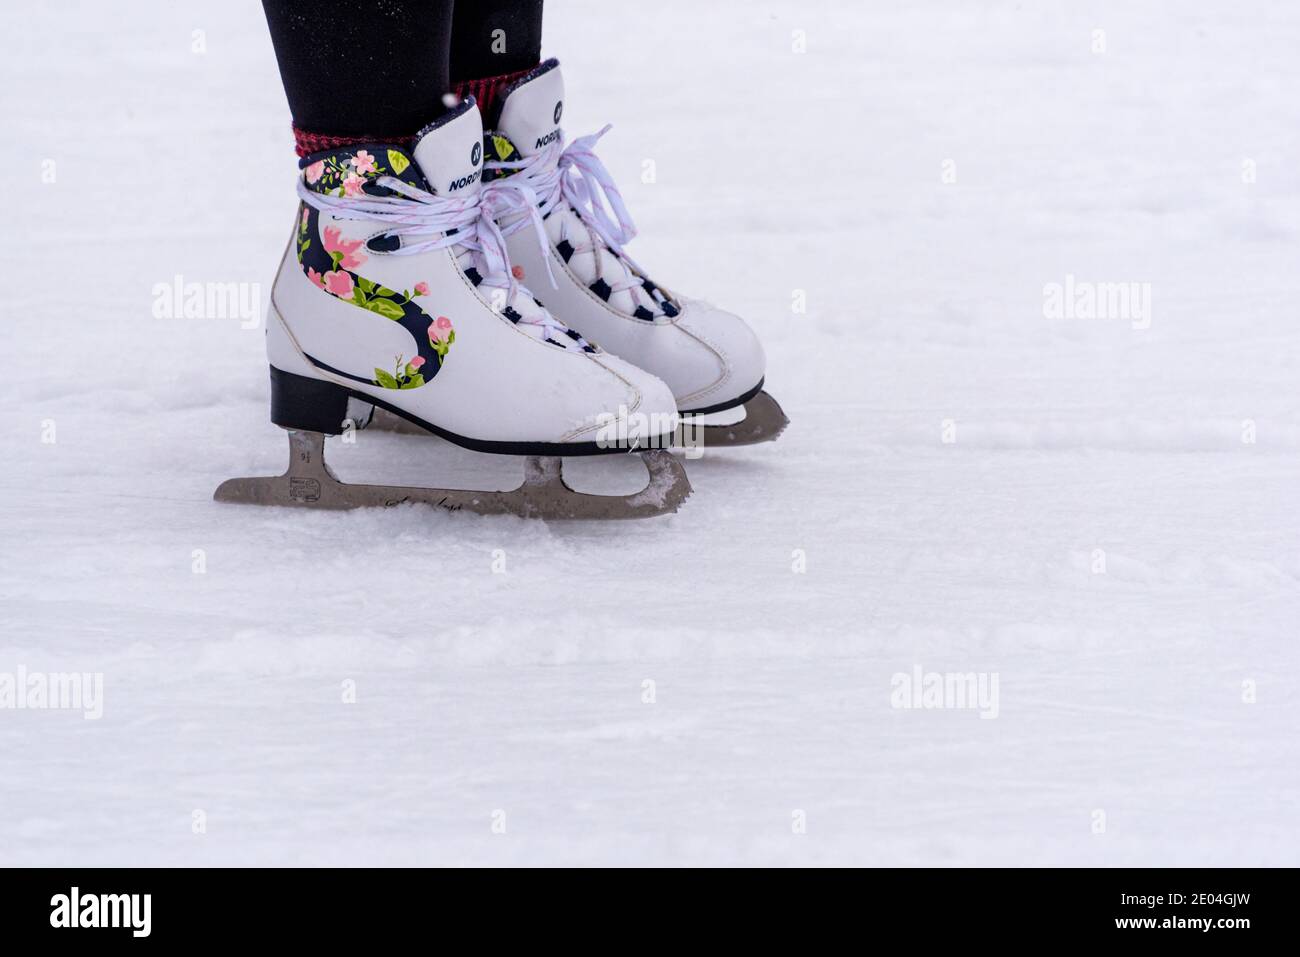 Saint Petersburg, Russia - December 26, 2020: women's ice skates Nordway on feet at ice rink. Stock Photo